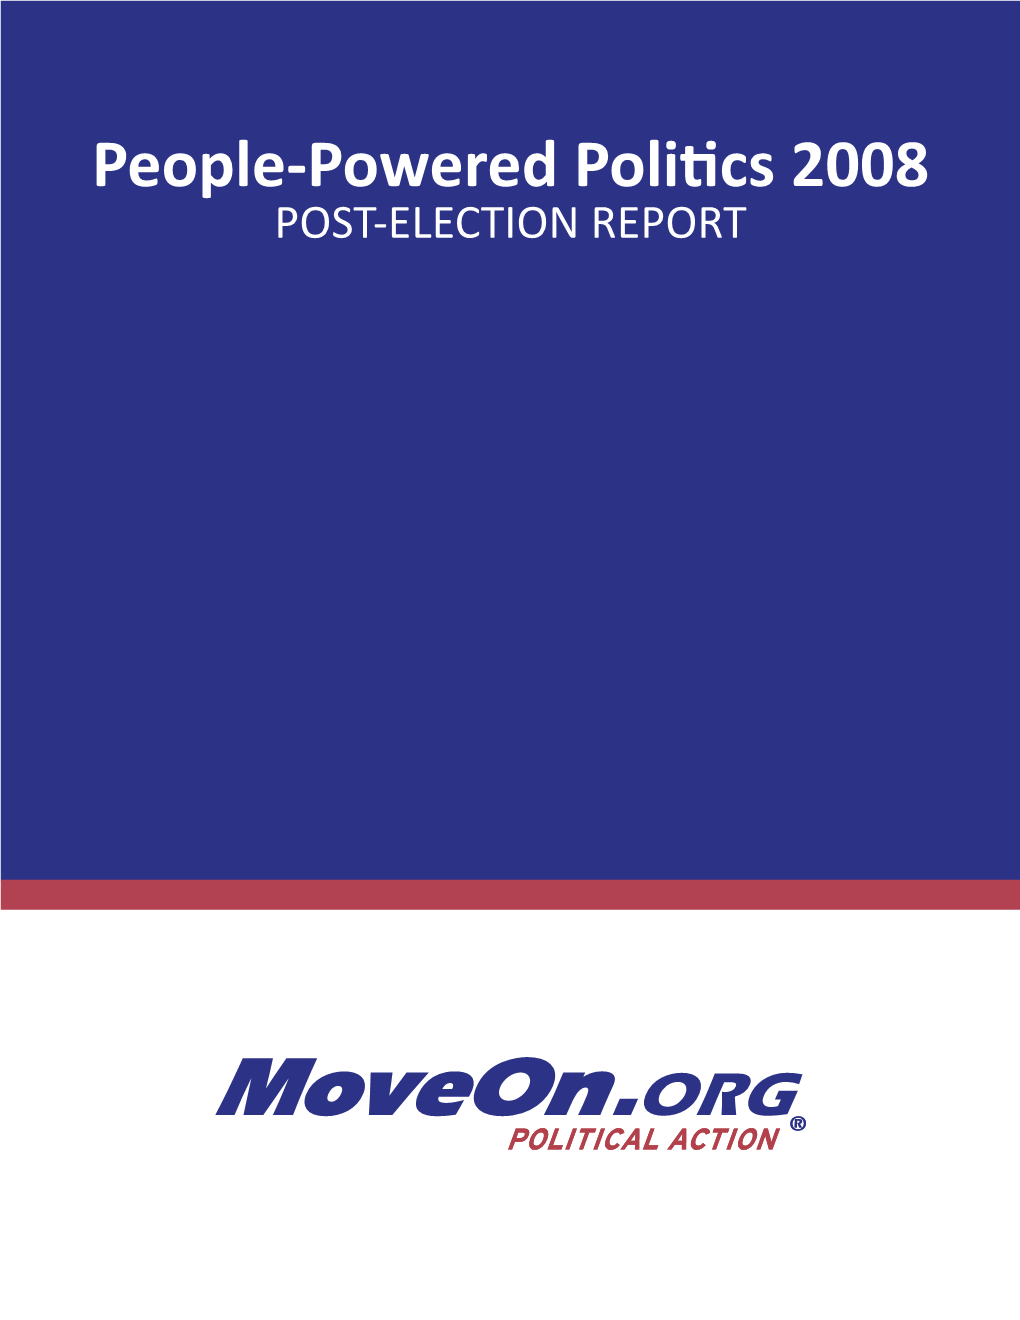 People-Powered Politics 2008 POST-ELECTION REPORT Introduction